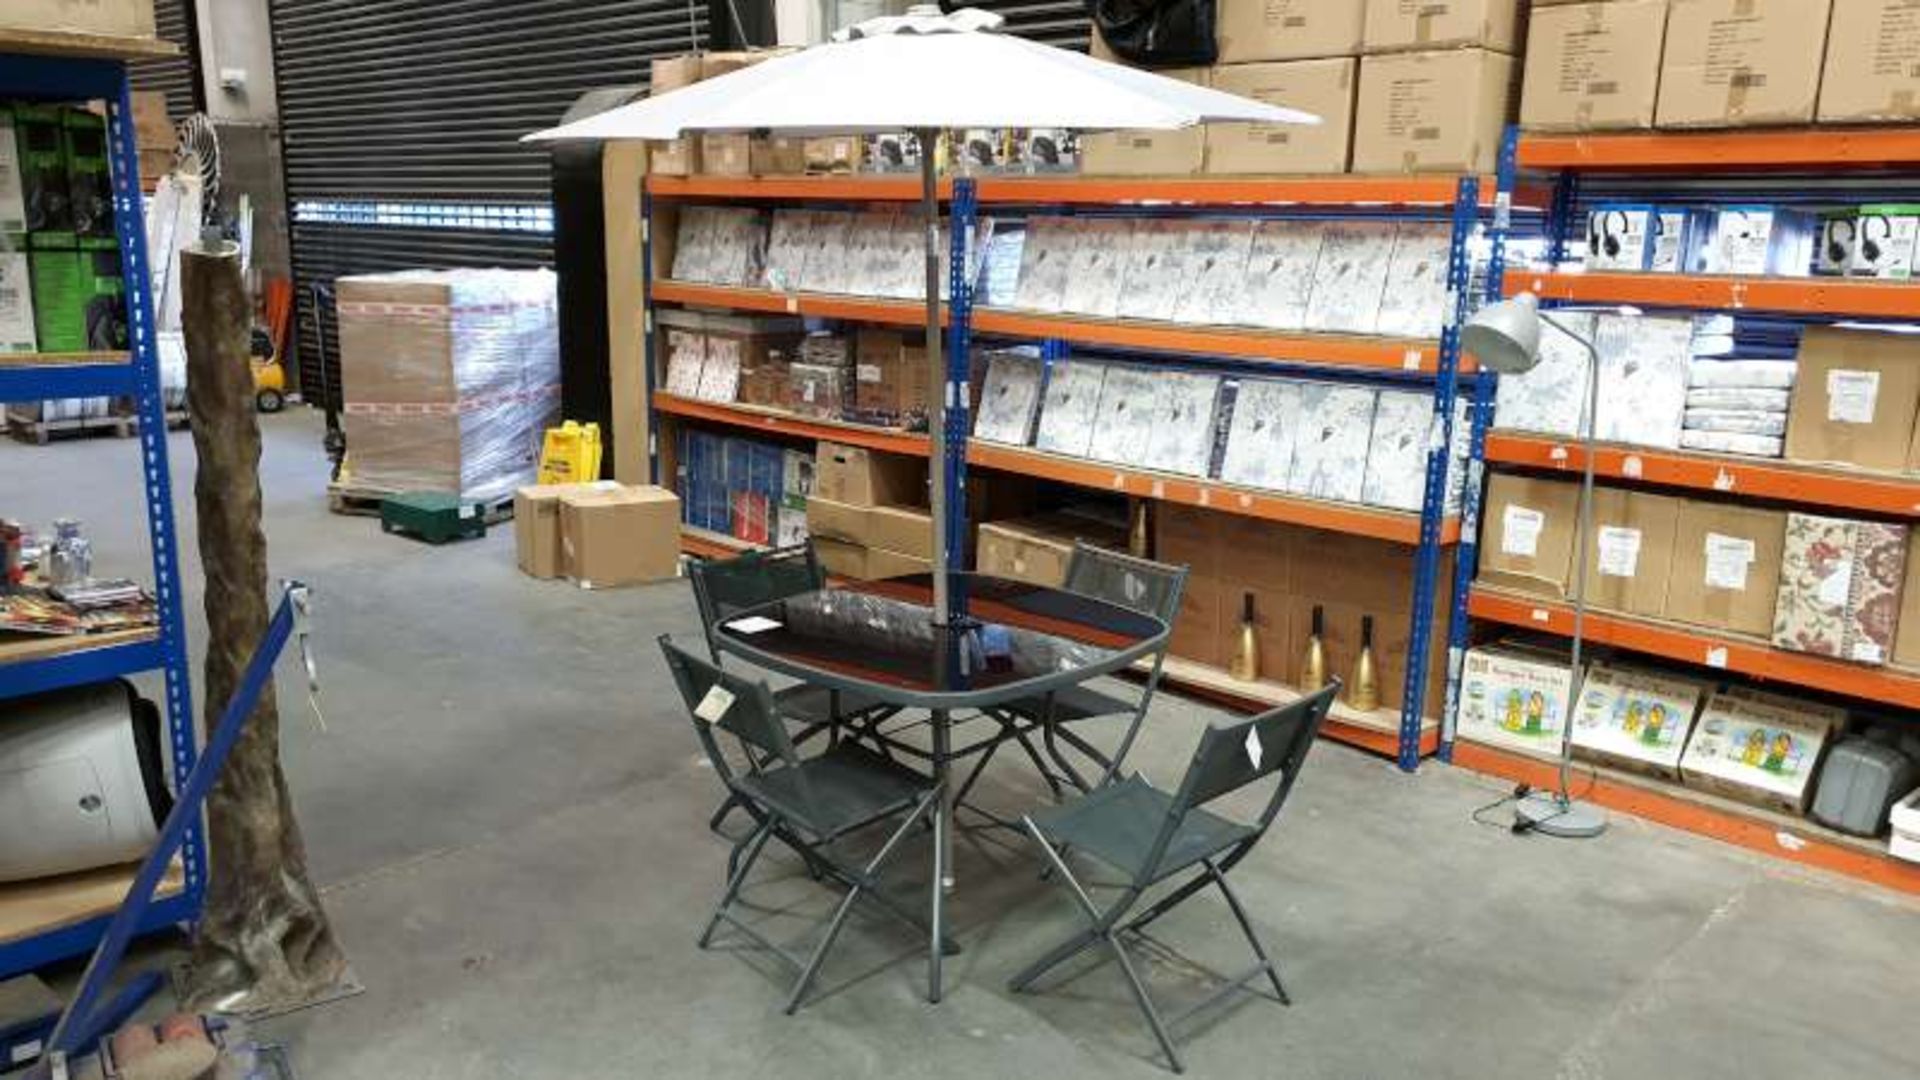 BRAND NEW SEVILLE GARDEN TABLE WITH 4 CHAIRS AND A PARASOL